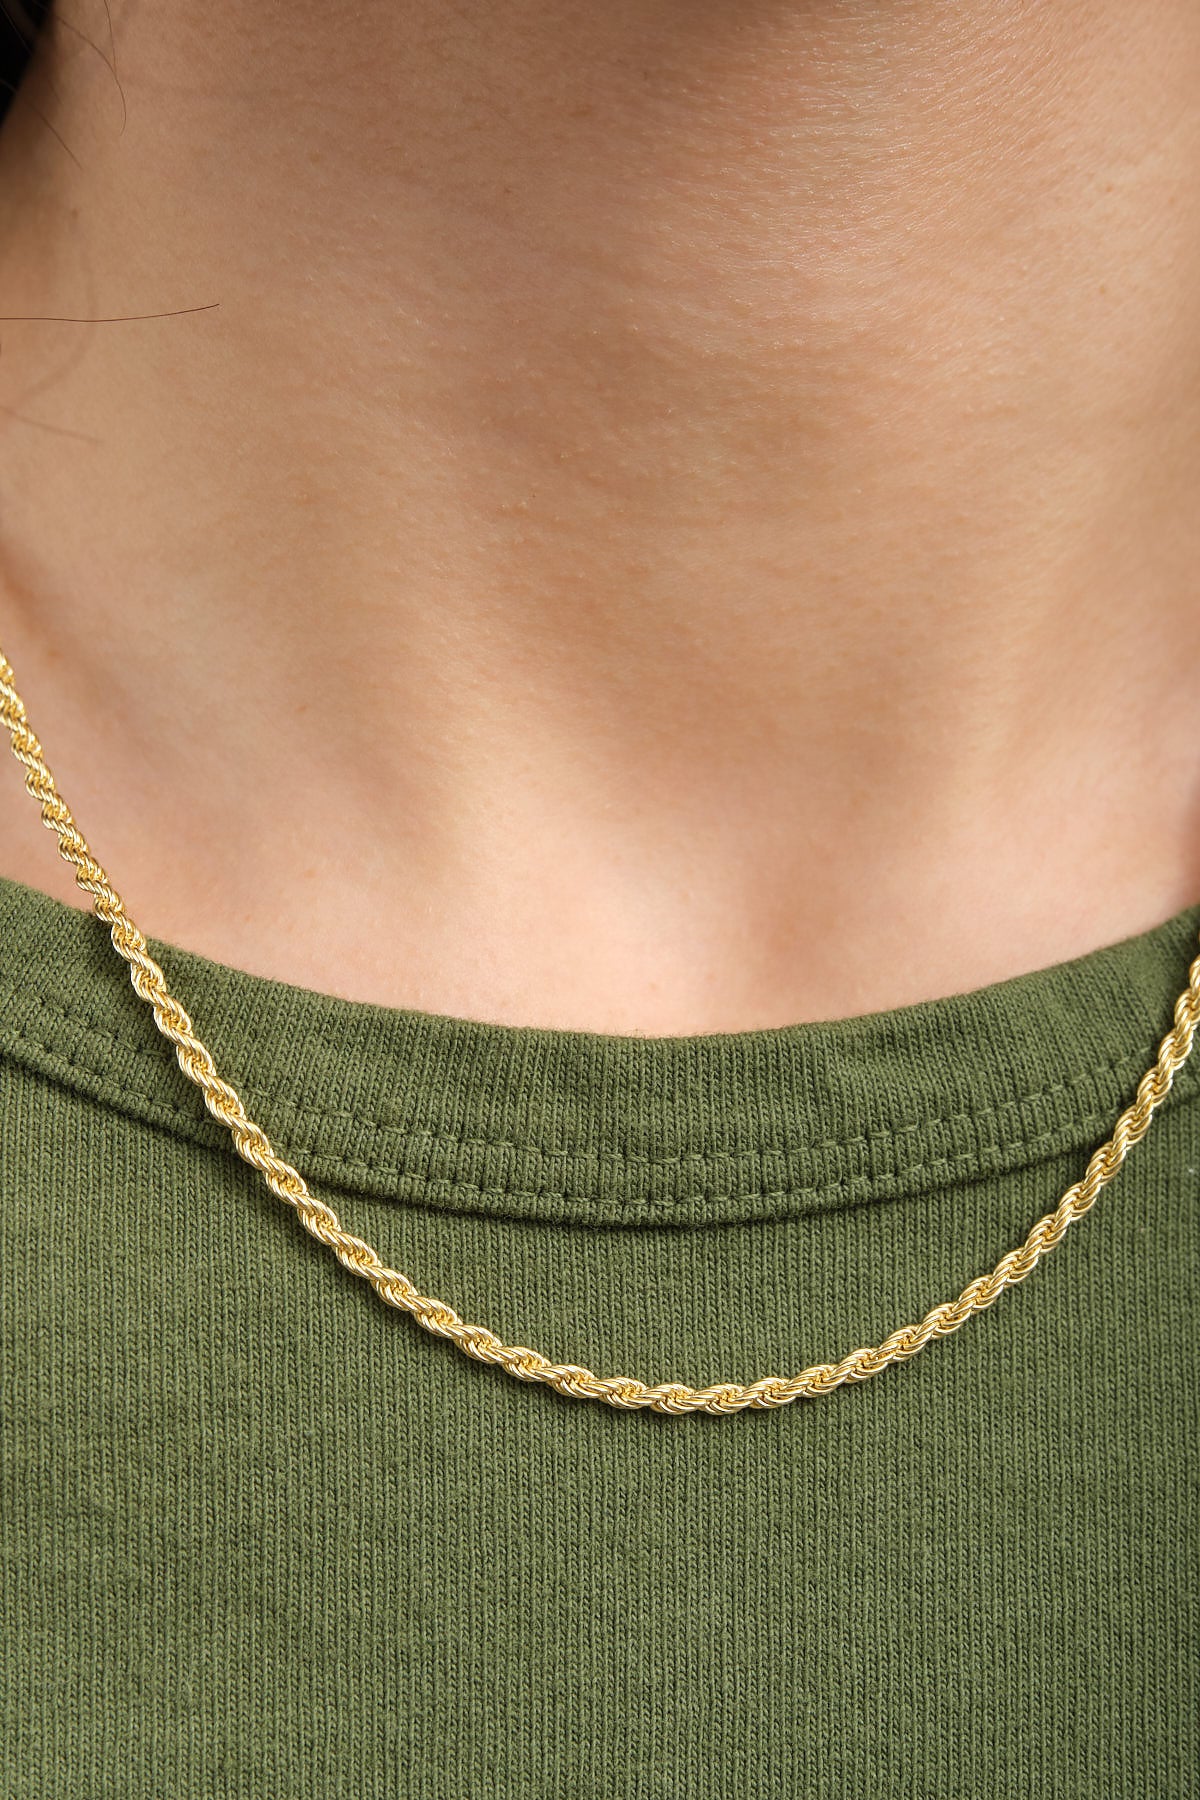 Stephanie Windsor Solid Gold Rope Chain Necklace